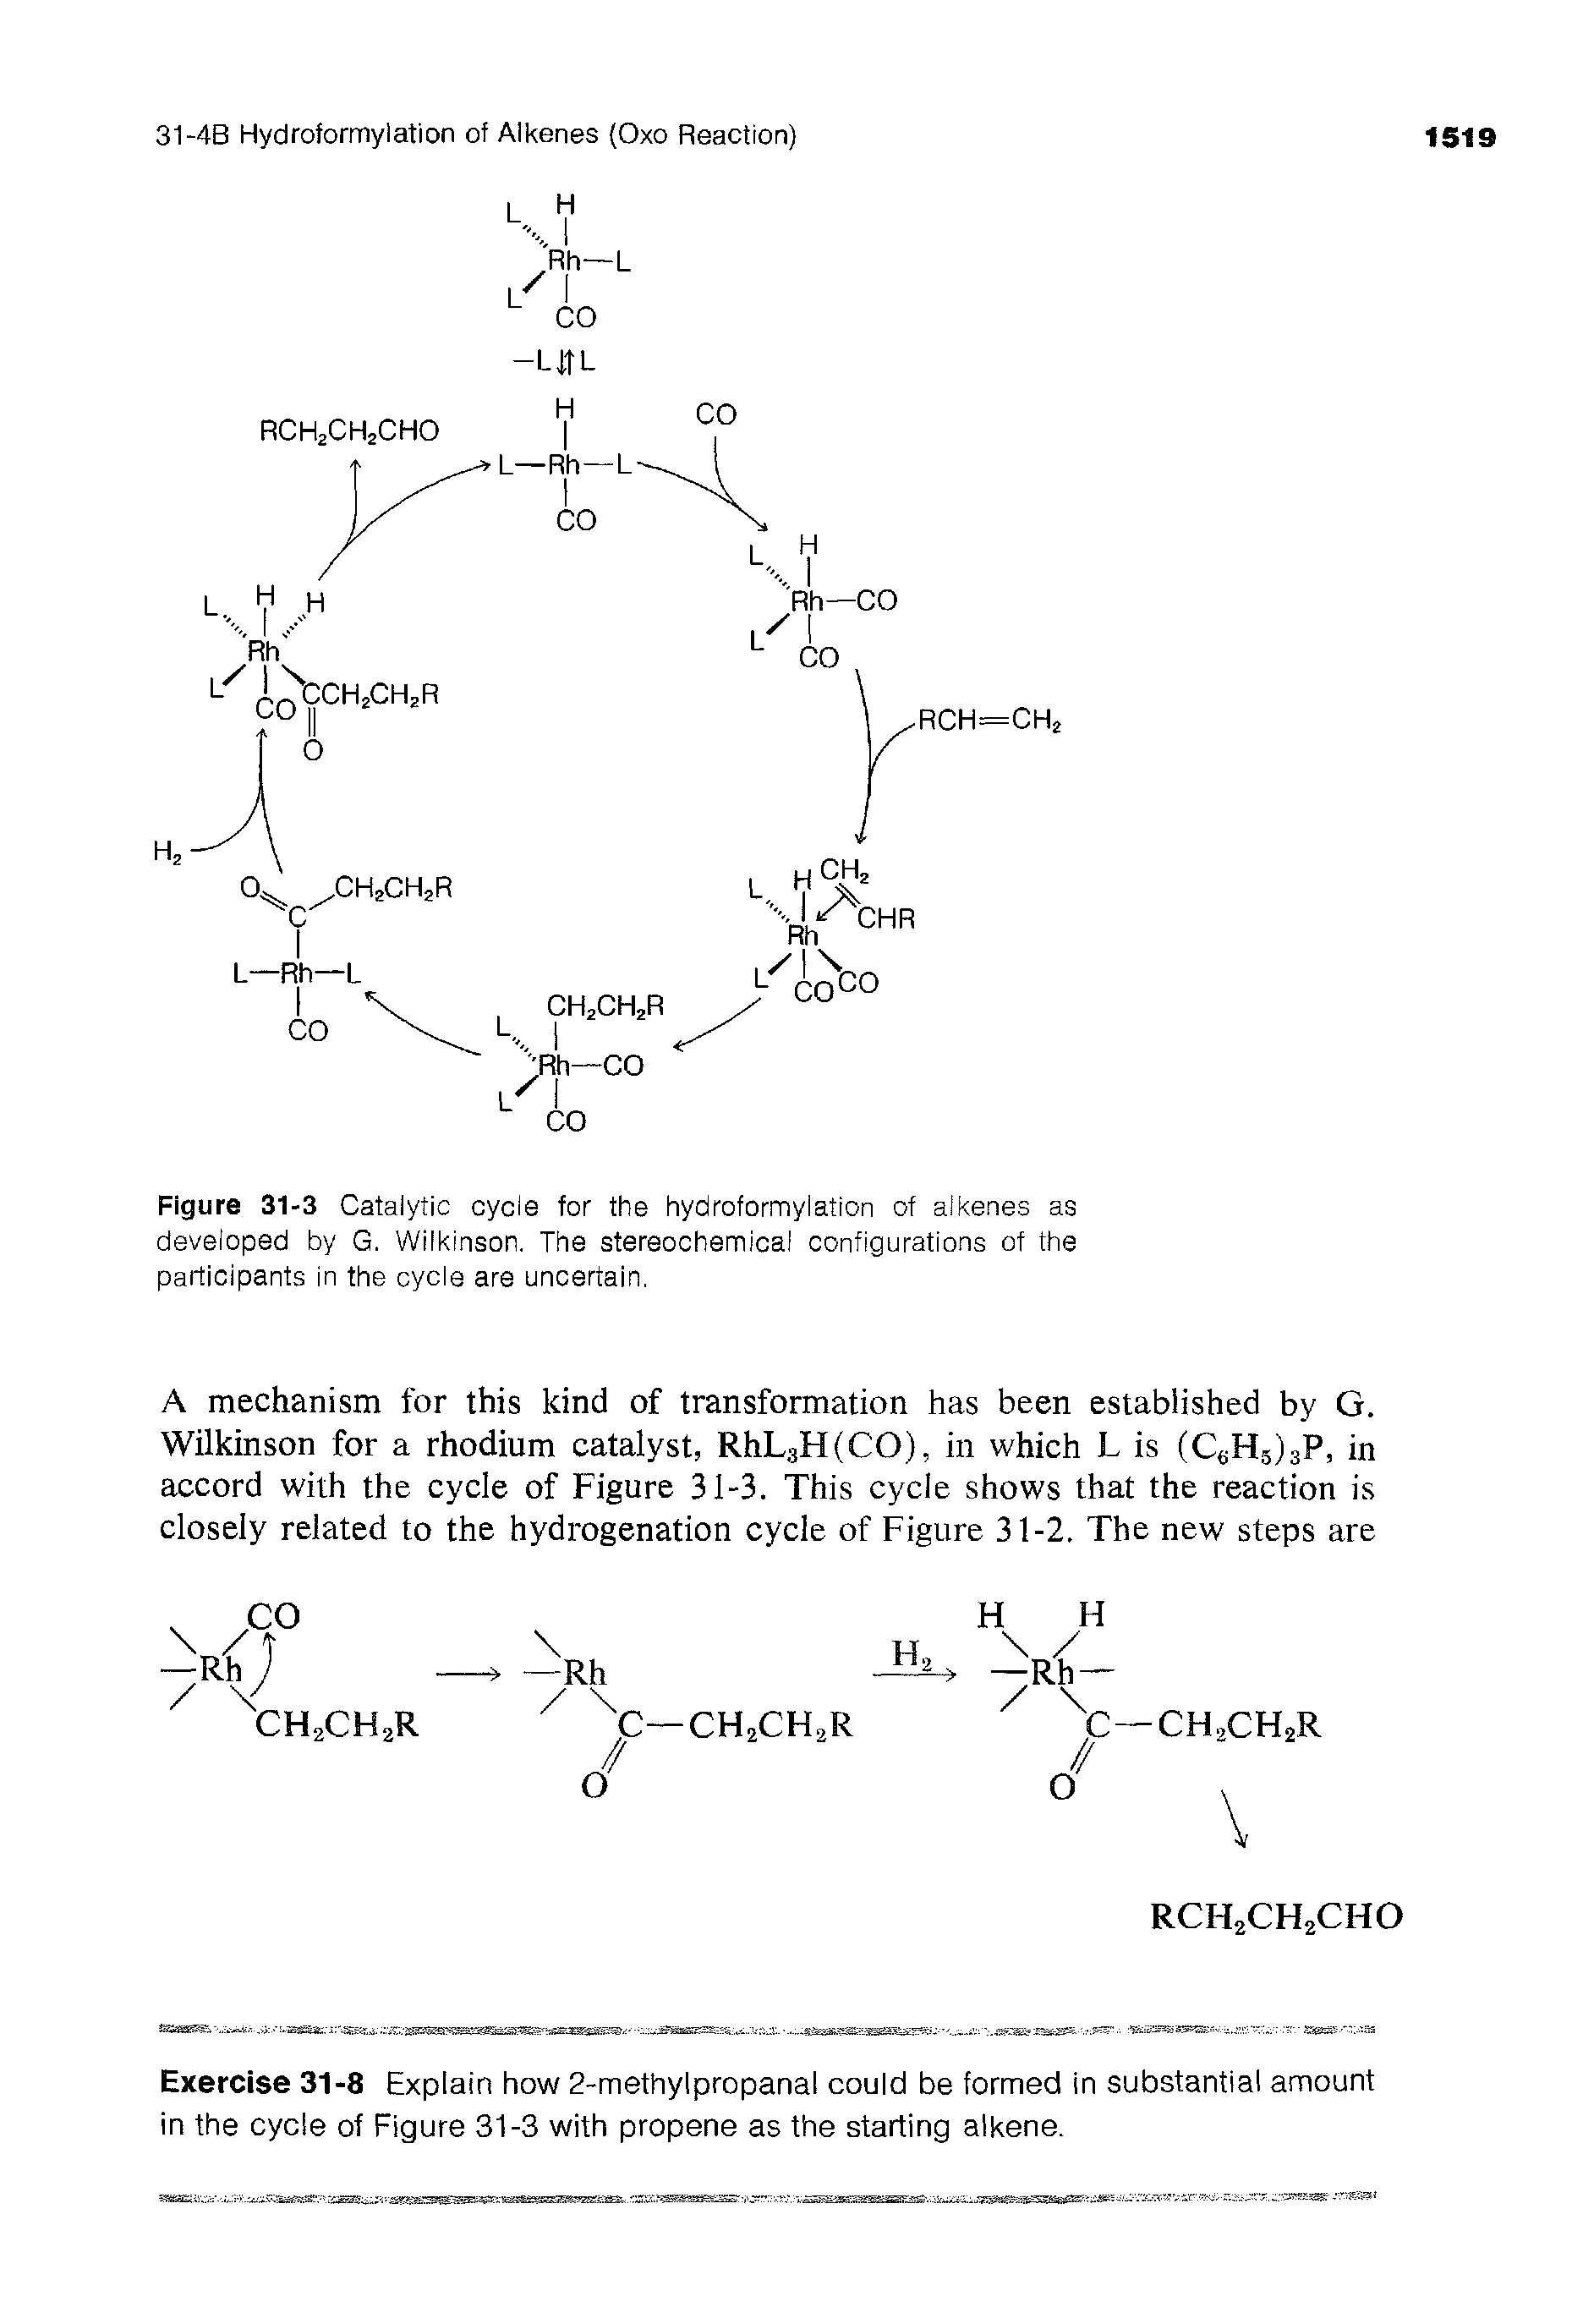 Figure 31-3 Catalytic cycle for the hydroformylation of alkenes as developed by G. Wilkinson. The stereochemical configurations of the participants in the cycle are uncertain.